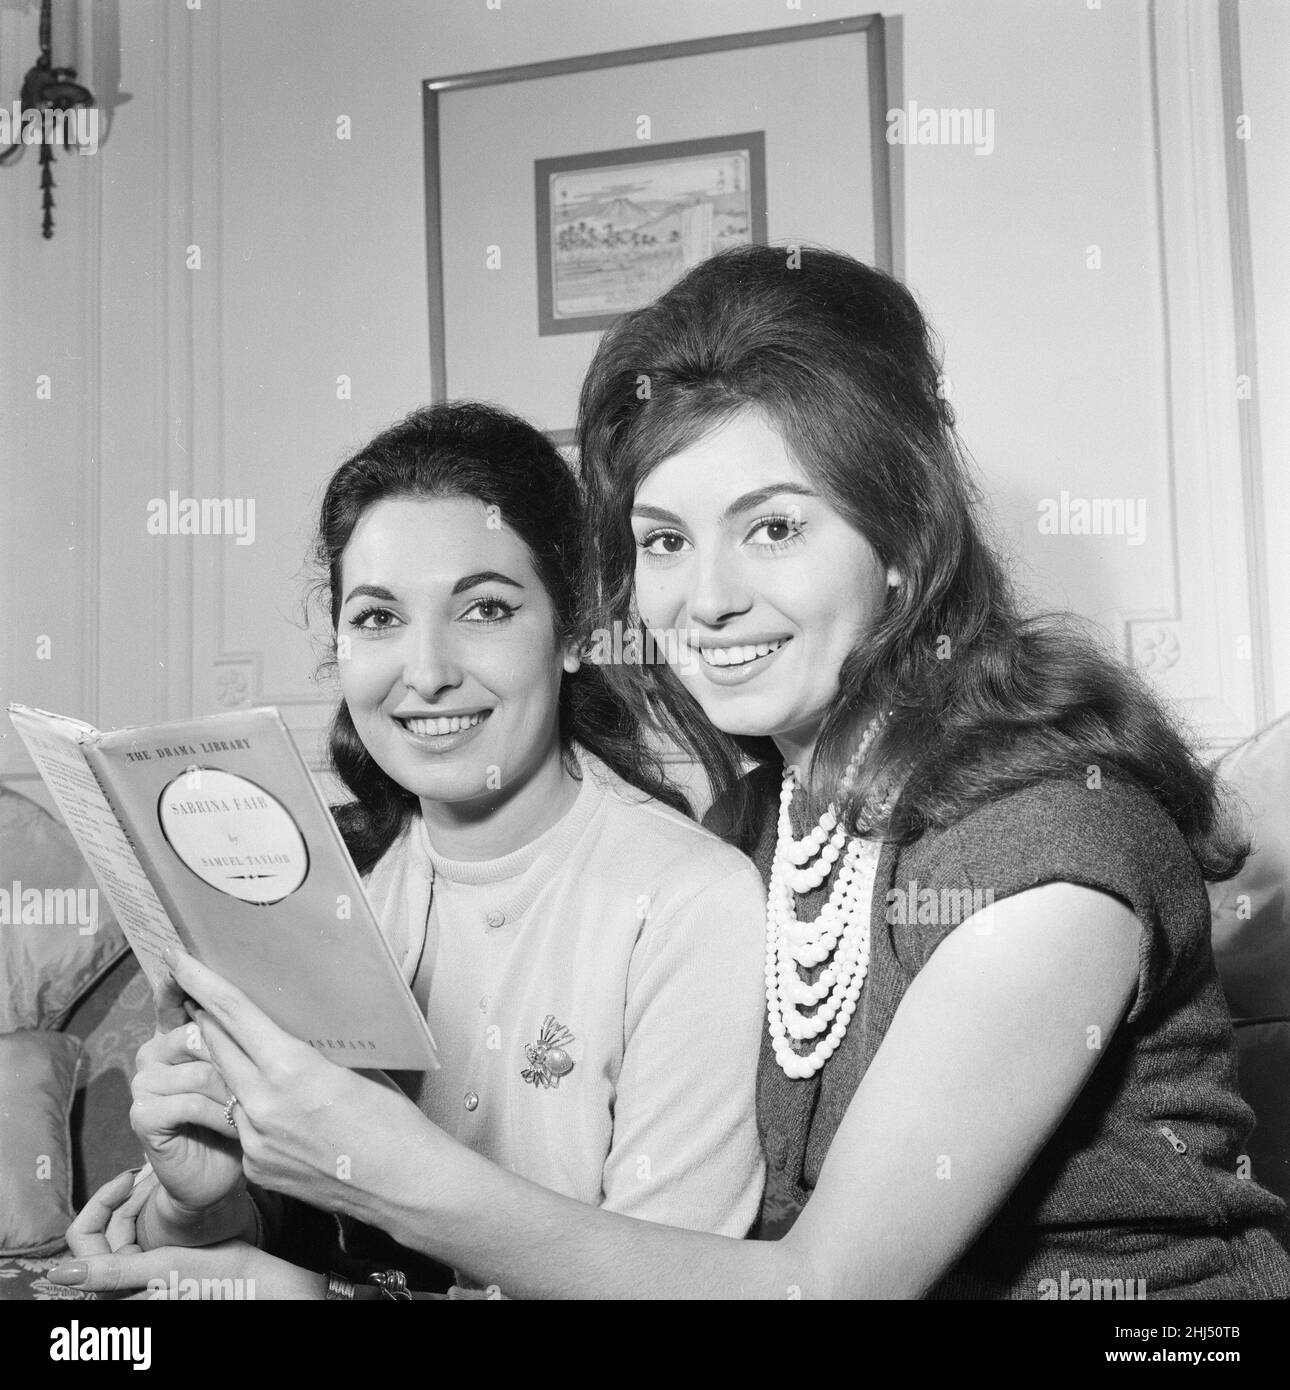 Rosanna Schiaffino, Italian actress, in the UK for a two week stay to learn English, pictured at The Savoy Hotel, London, Wednesday 12th October 1960. Also pictured, her sister and companion Maria Pia Schiaffino. Stock Photo